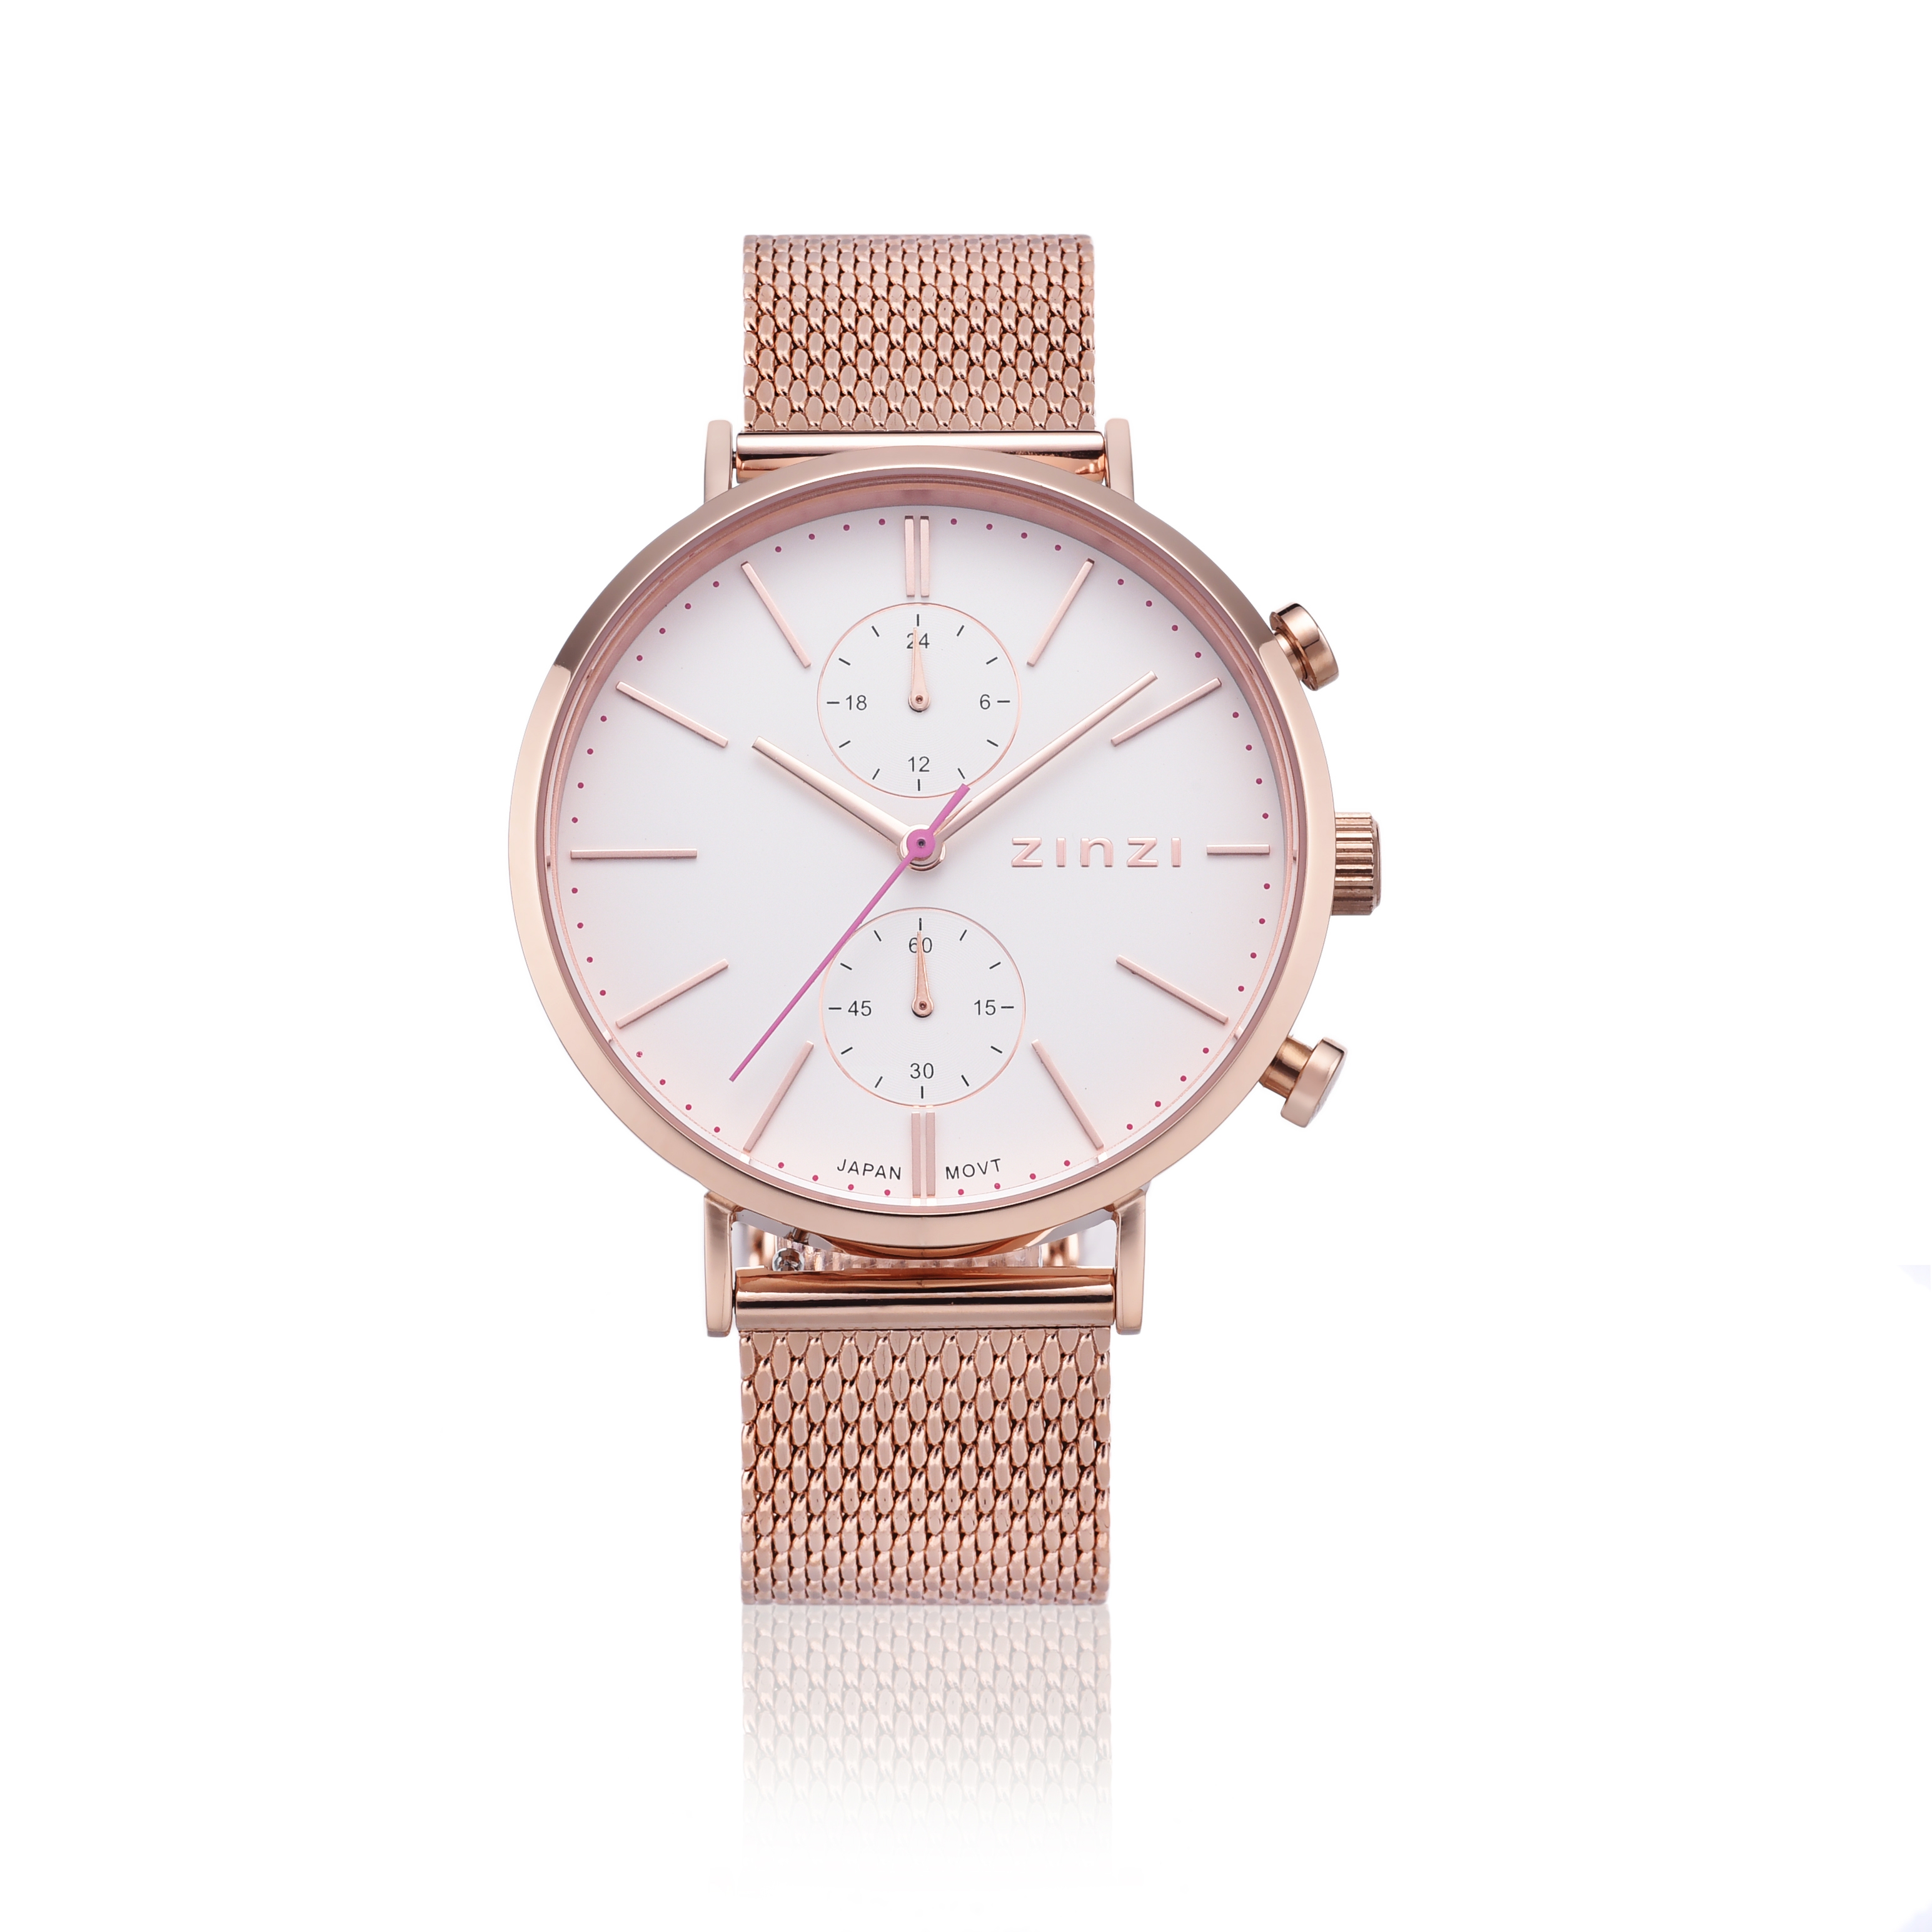 ZINZI Traveller Watch 39mm White Dial Rose Gold Colored Stainless Steel Case and Mesh Strap with dual time ZIW708M